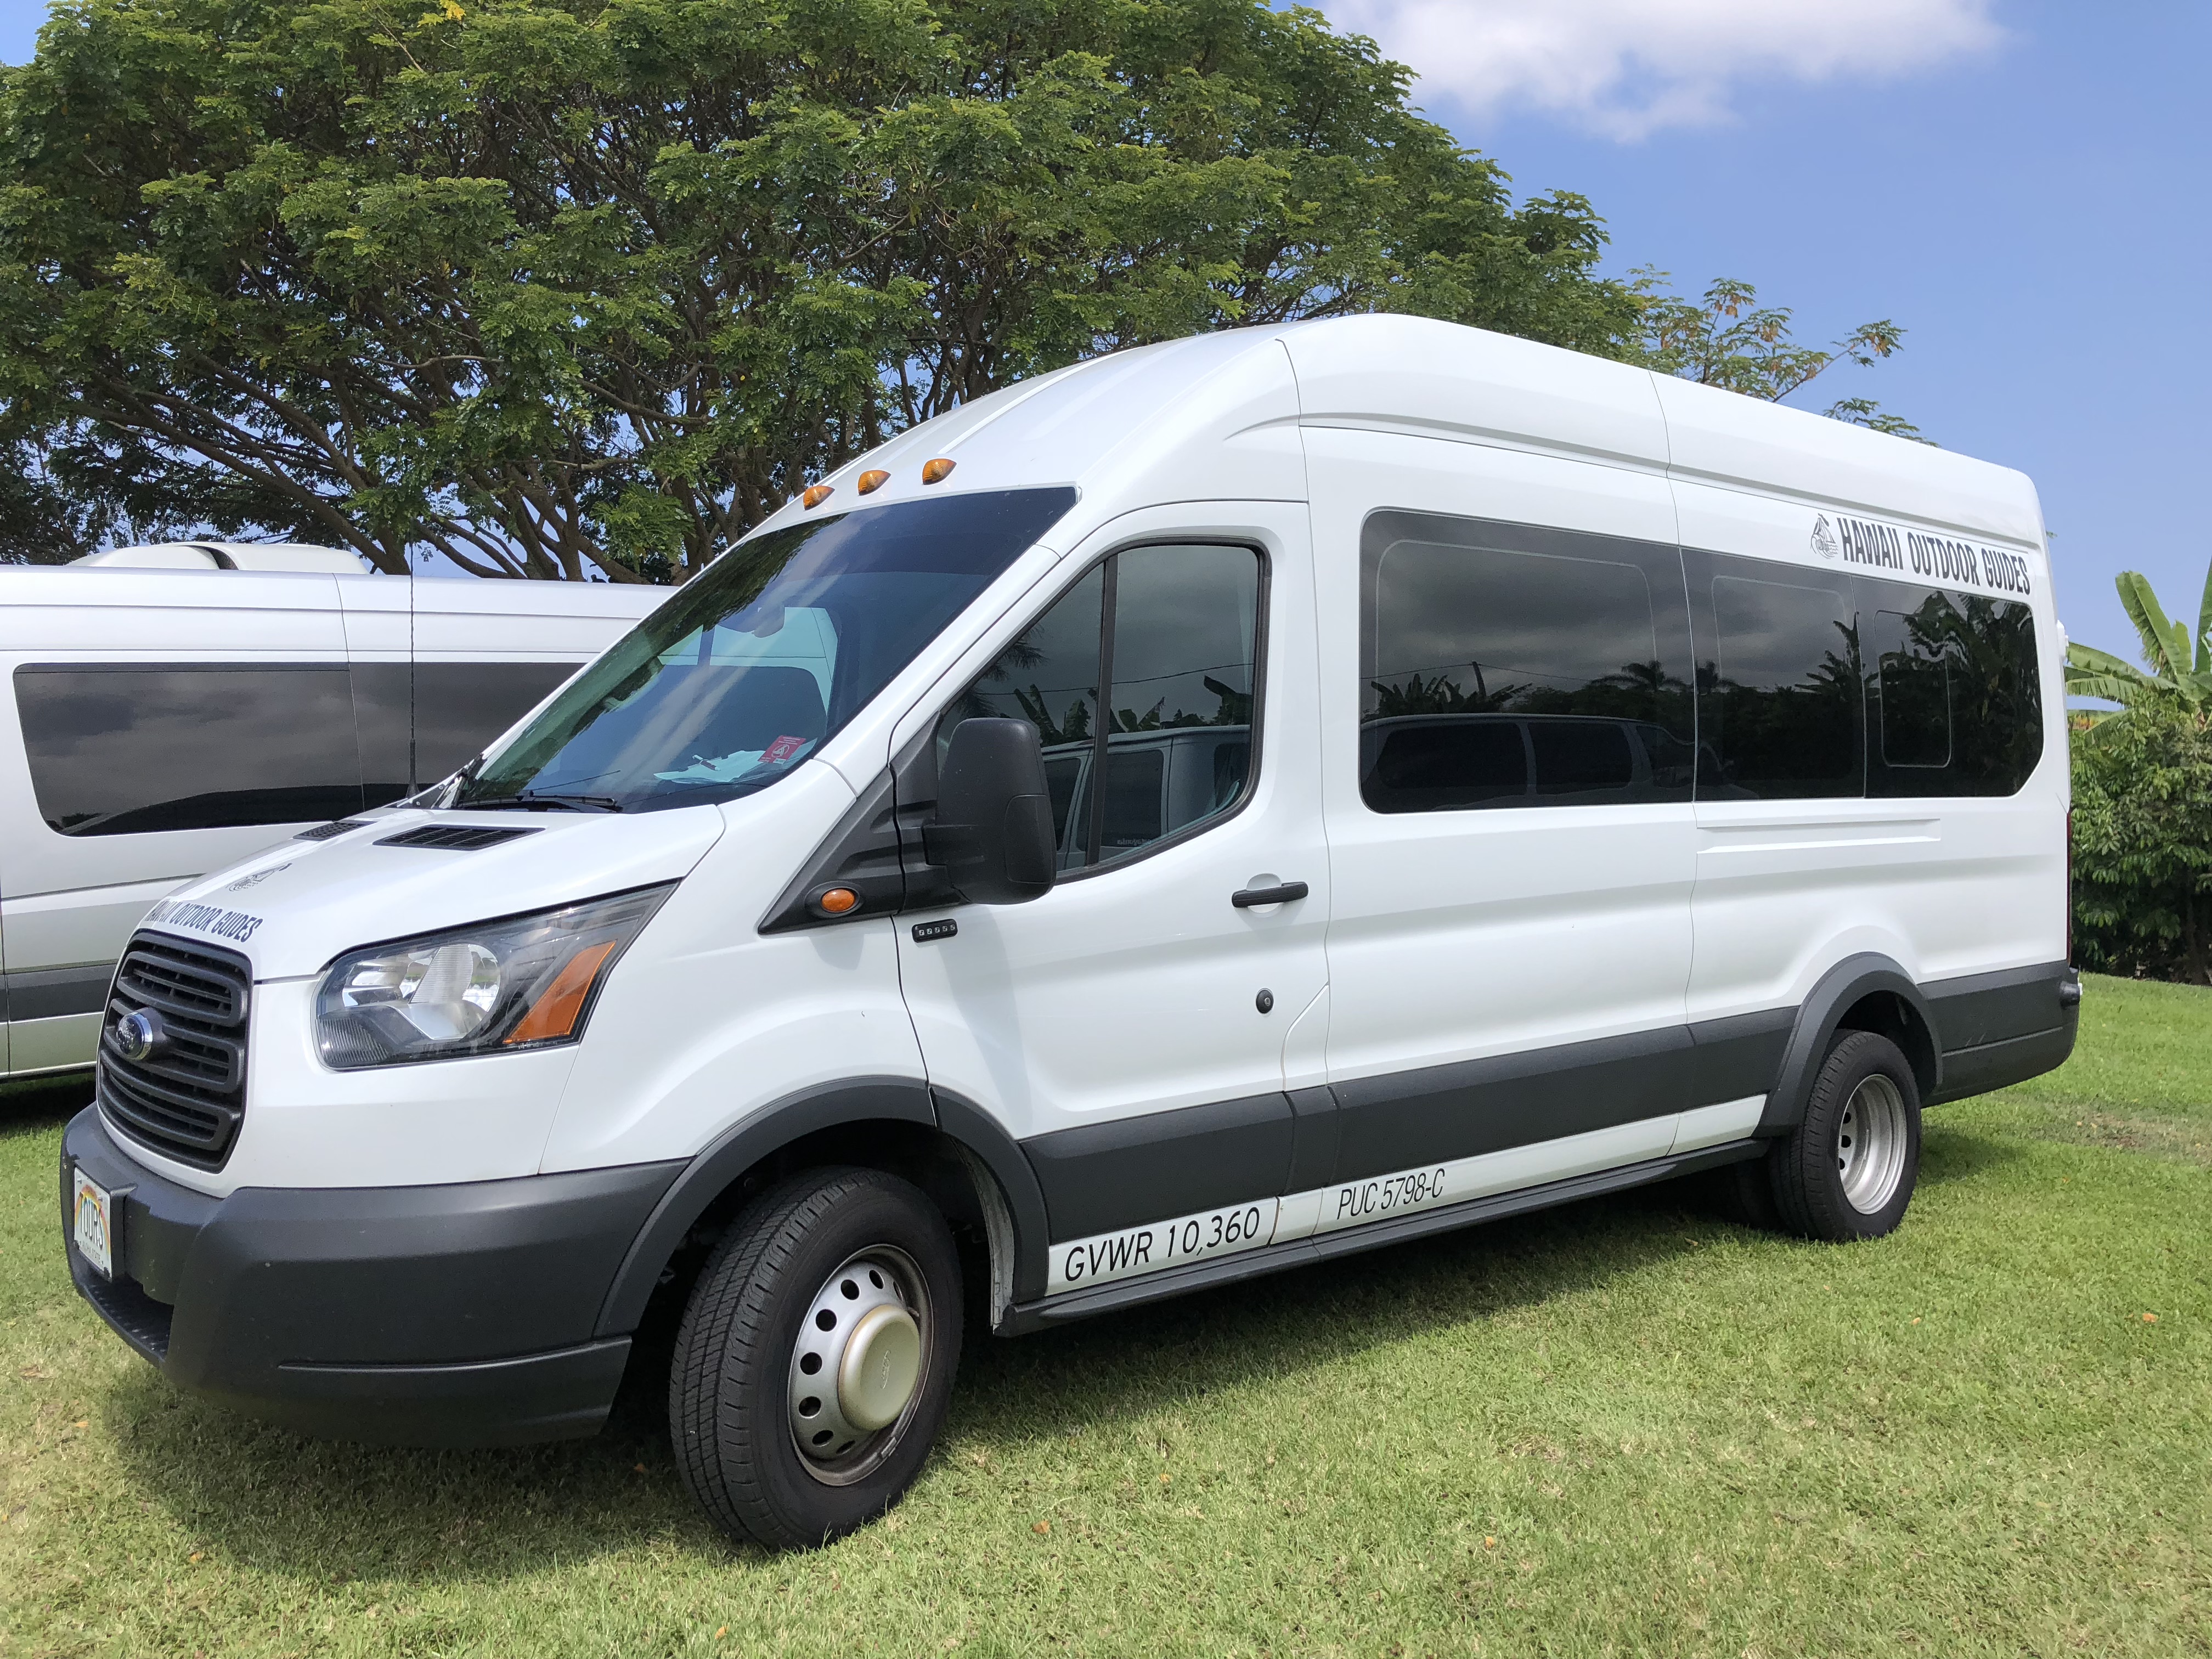 Vans and vehicles | Hawaii Outdoor Guides